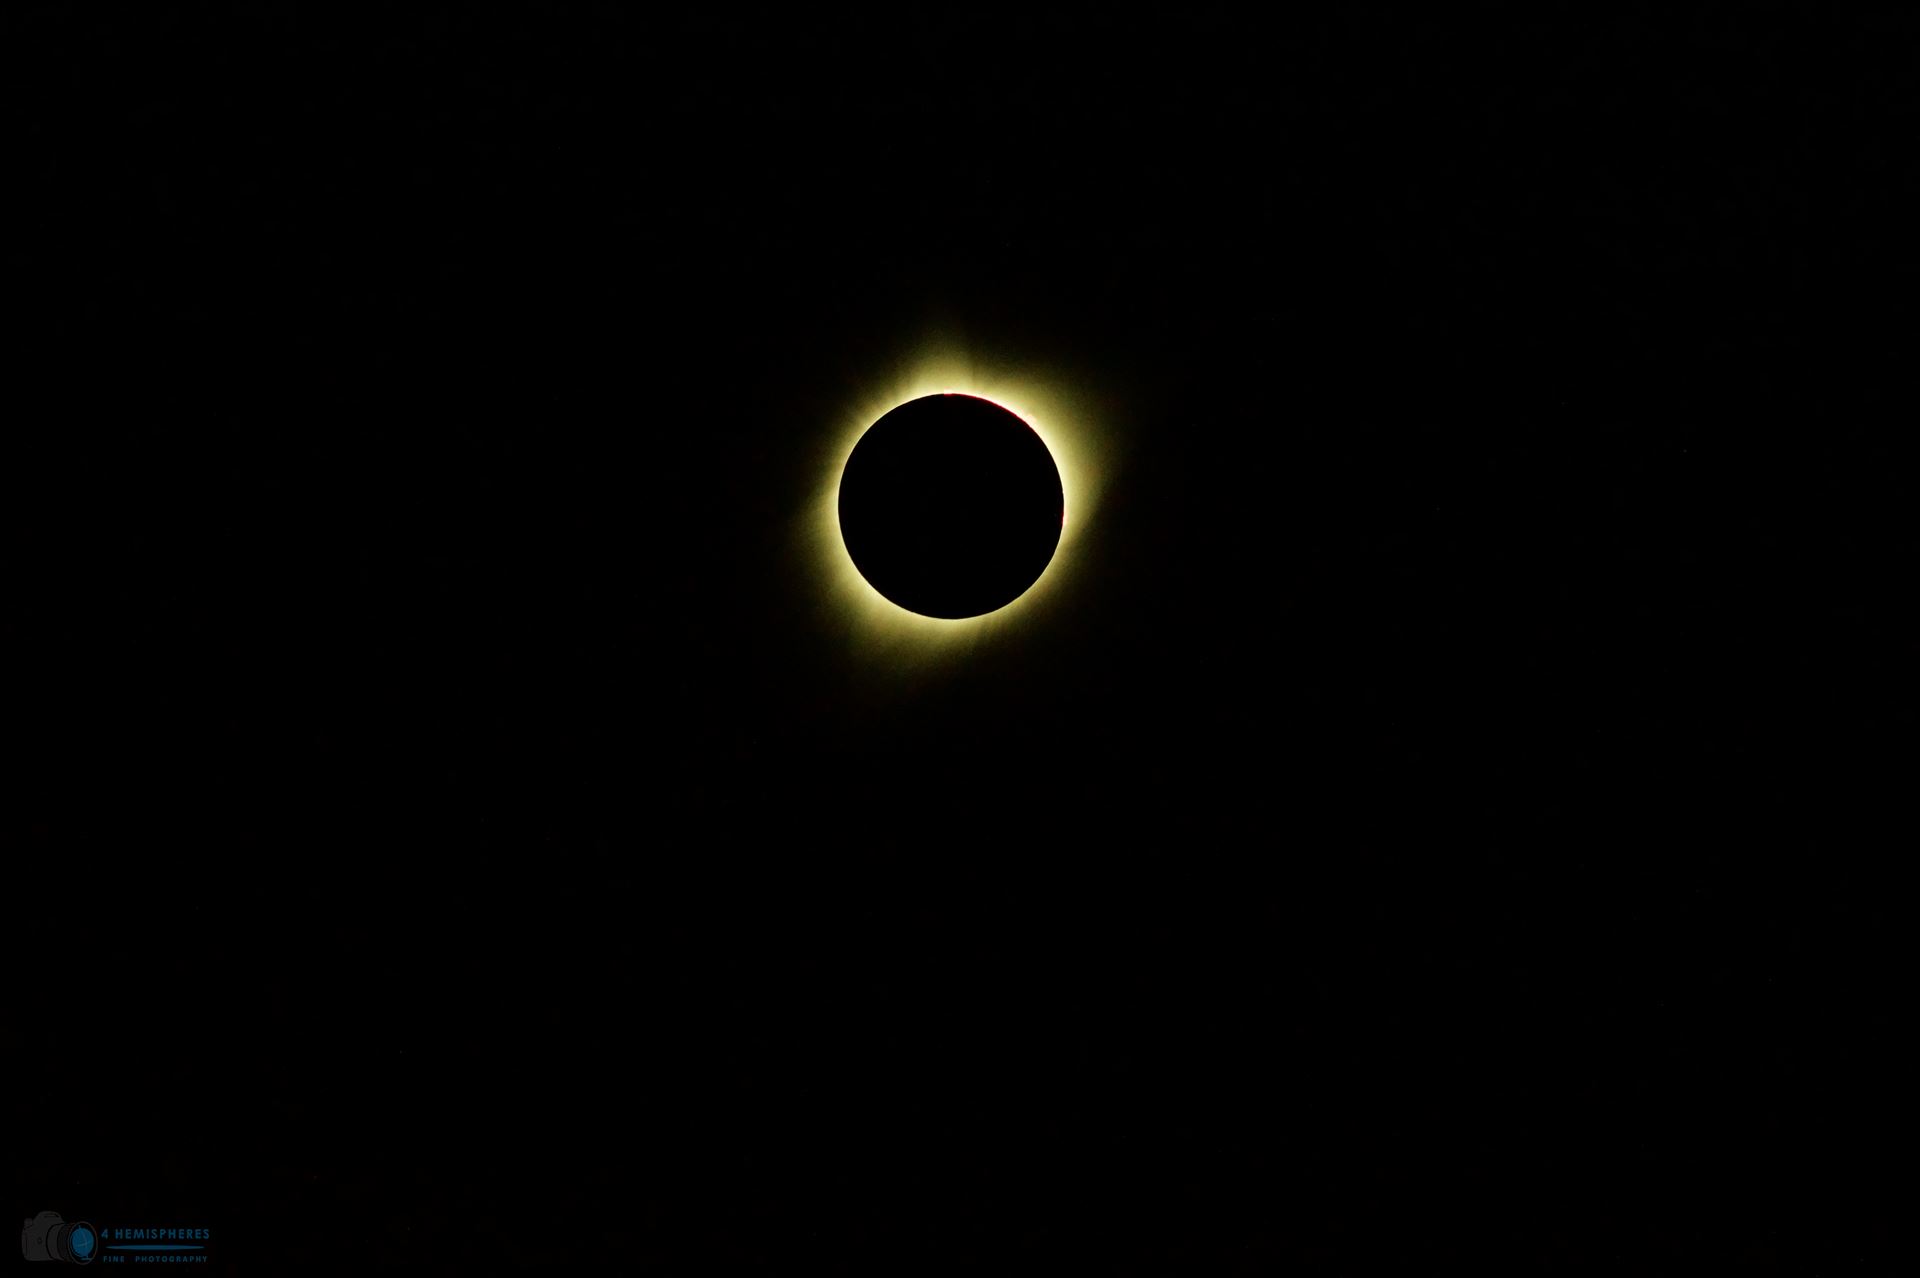 Corona 2 The corona and its flares remain visible throughout totality.  by 4 Hemispheres Photography